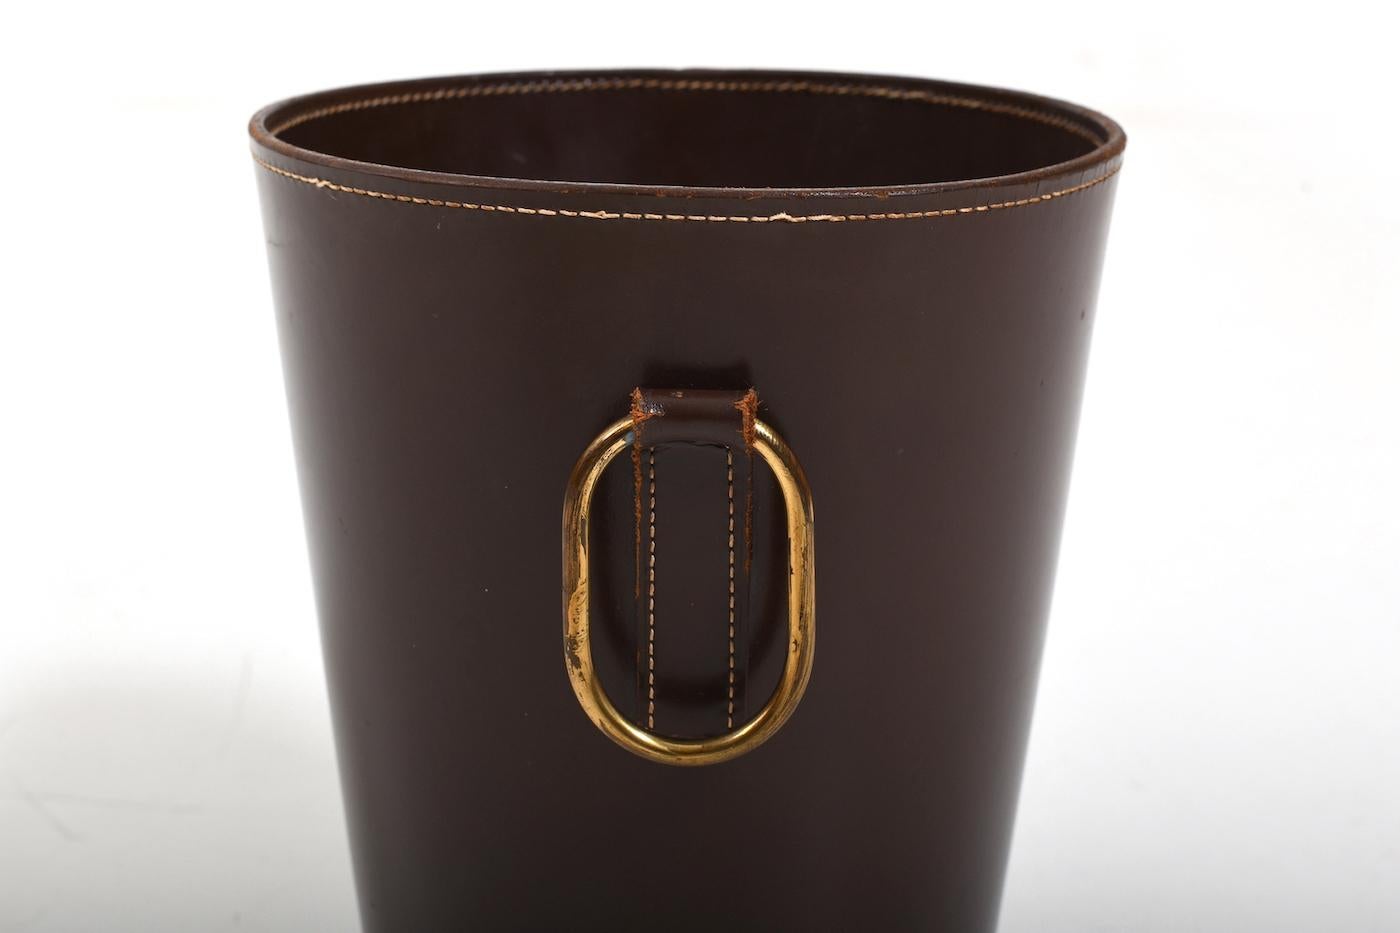 Mid century Carl Auböck waste paper basket for Illums Bolighus 1950s. Made in darker brown core leather and with brass handle. Beautiful old patina. In very good vintage condition, with minor signes of age. Size: H. 30 cm / Ø 25.5 cm